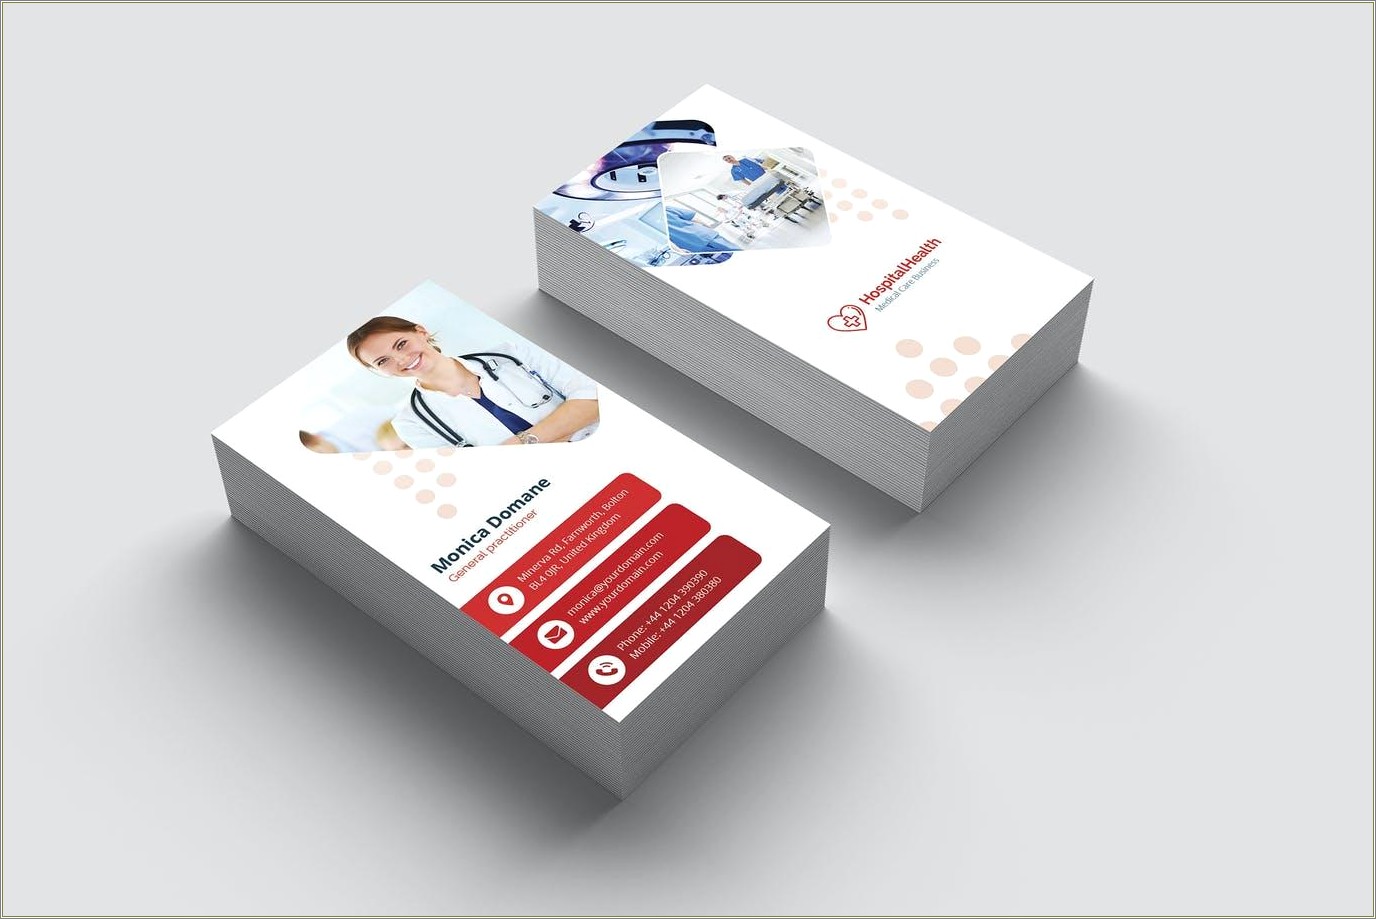 Home Health Aide Business Card Photoshop Template Free